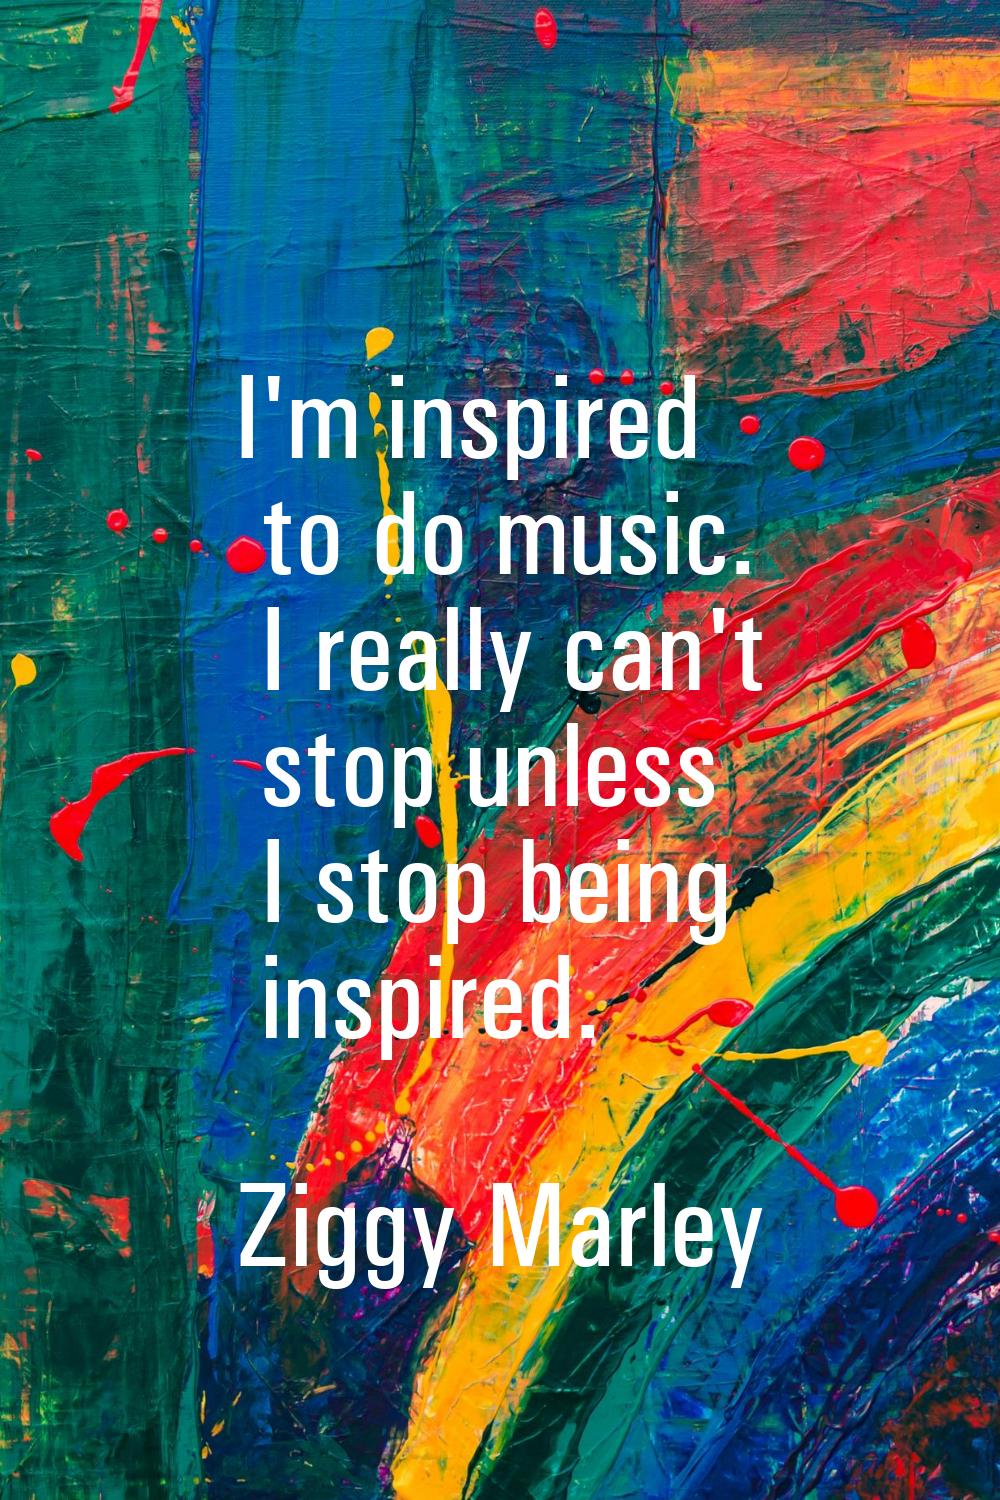 I'm inspired to do music. I really can't stop unless I stop being inspired.